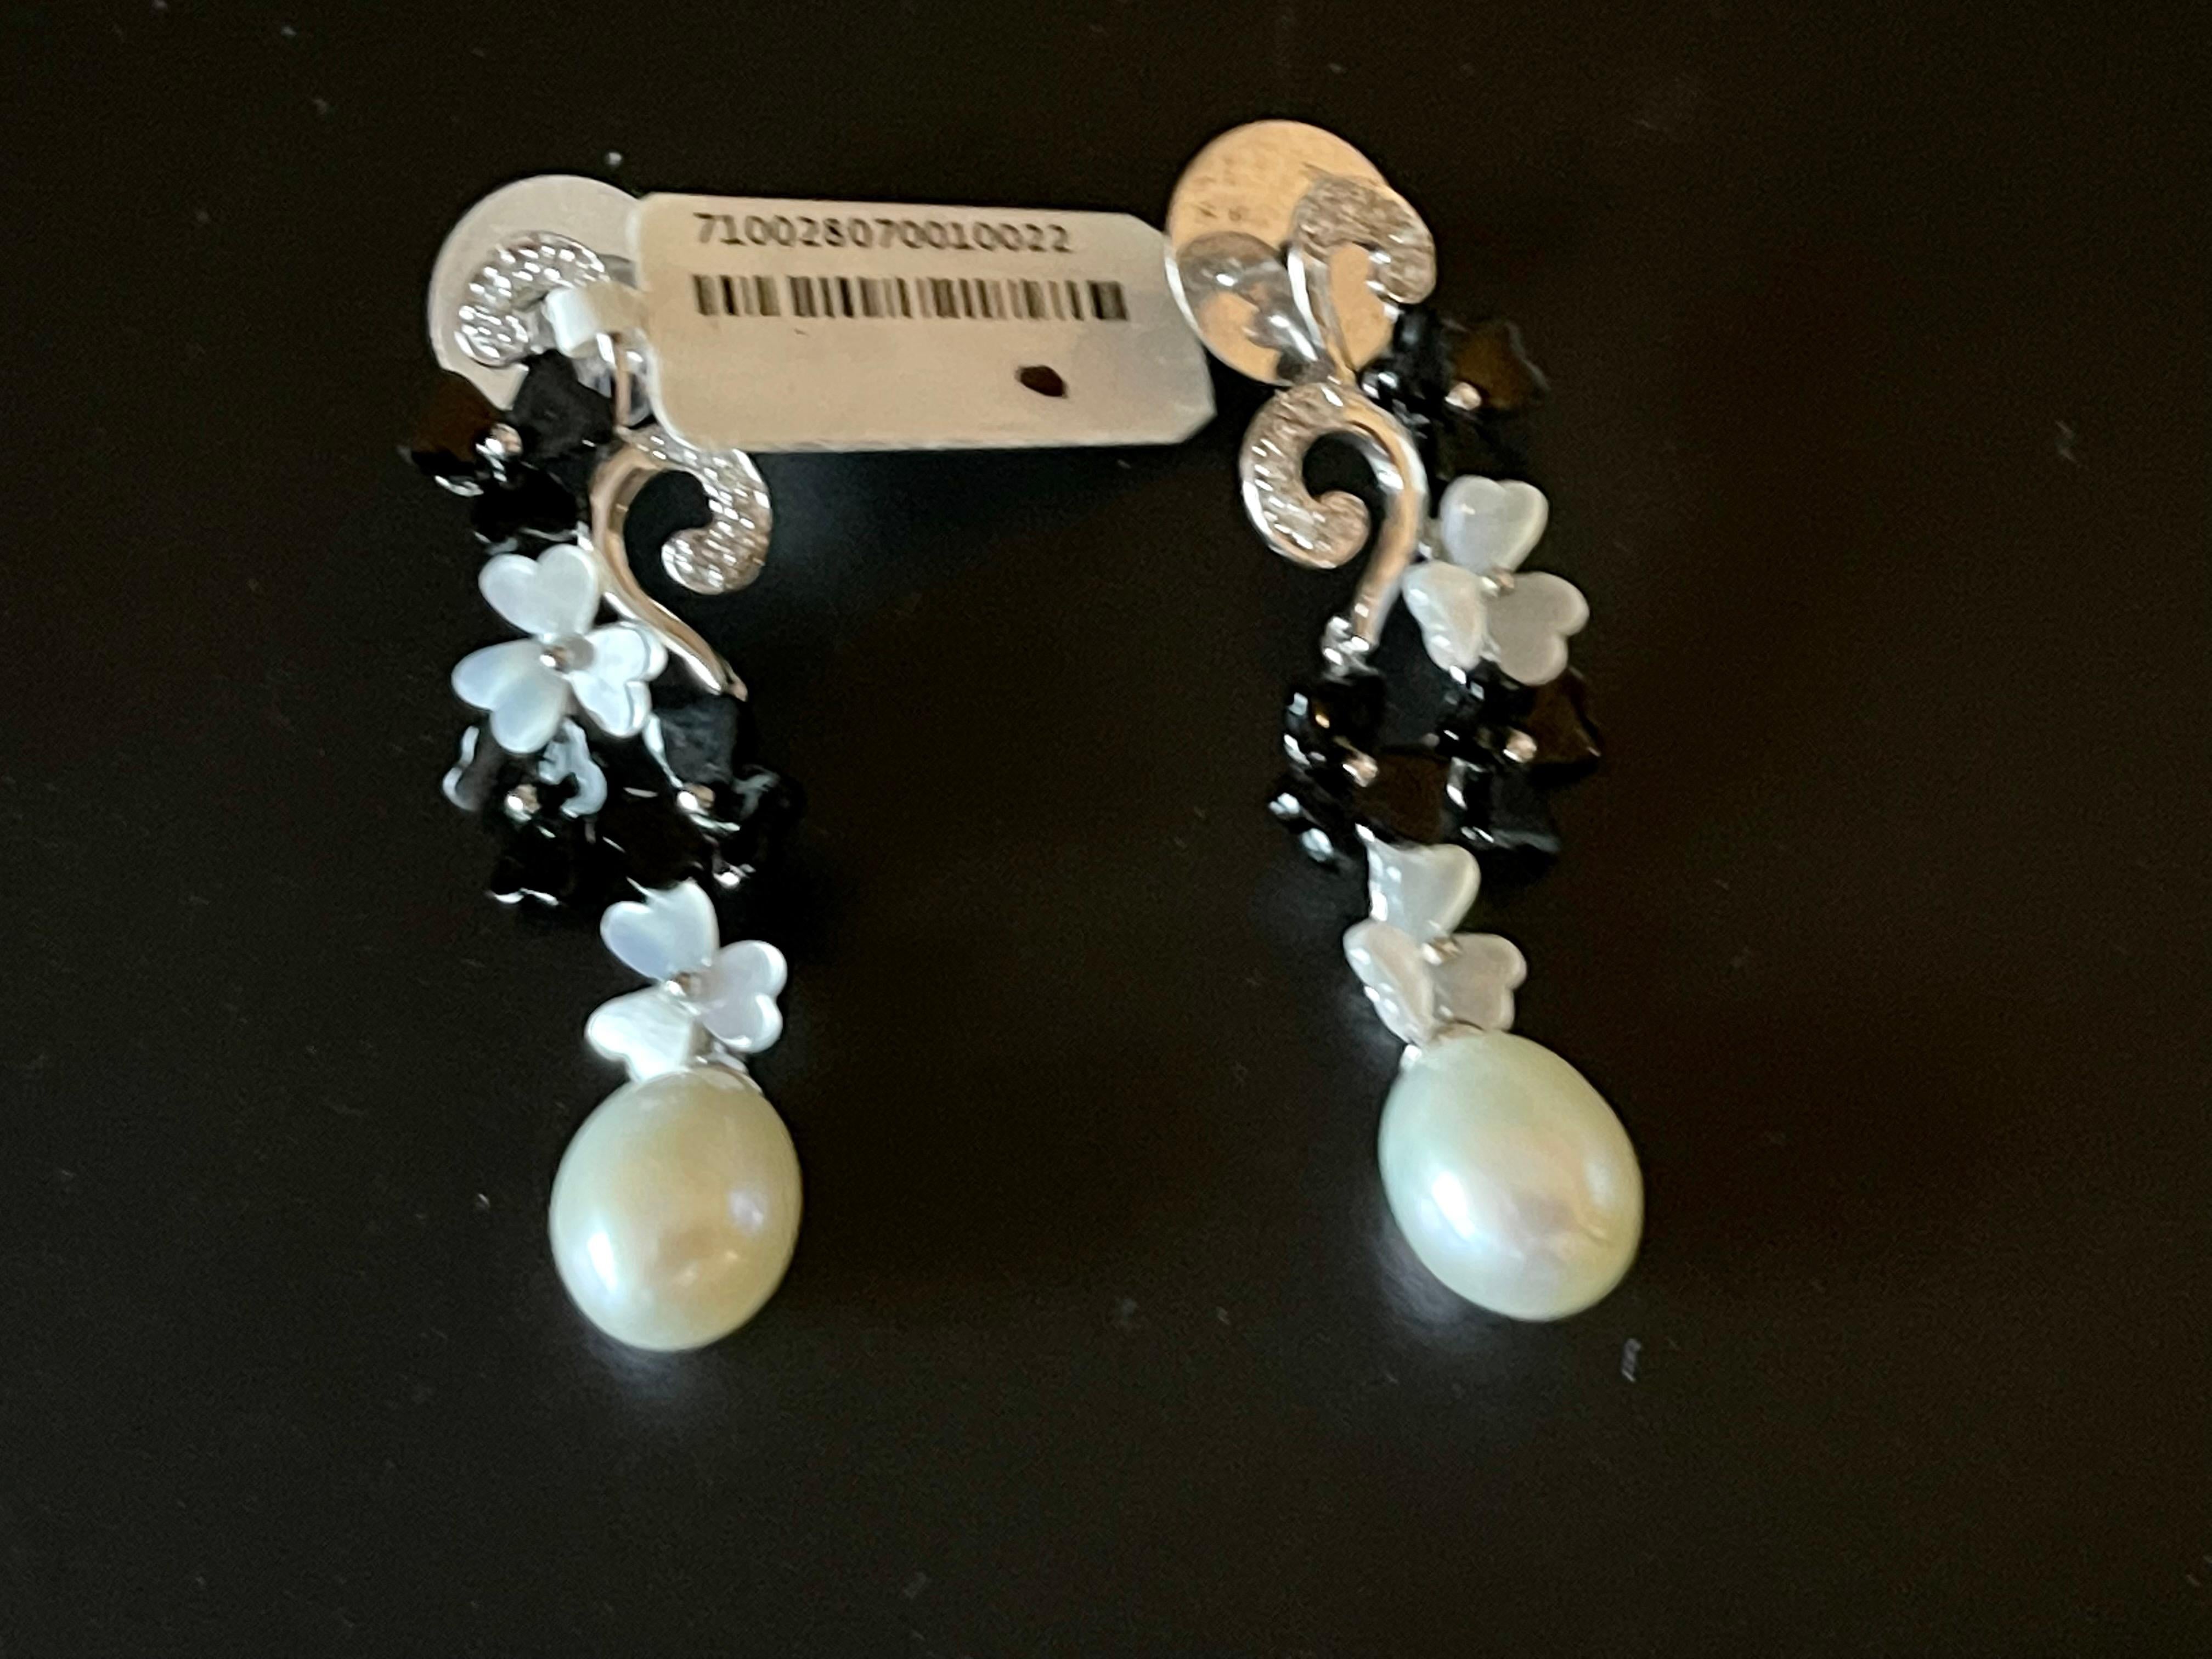 Brilliant Cut Darling Earrings 18 K White Gold Onyx Mother of Pearl Diamond Onyx For Sale